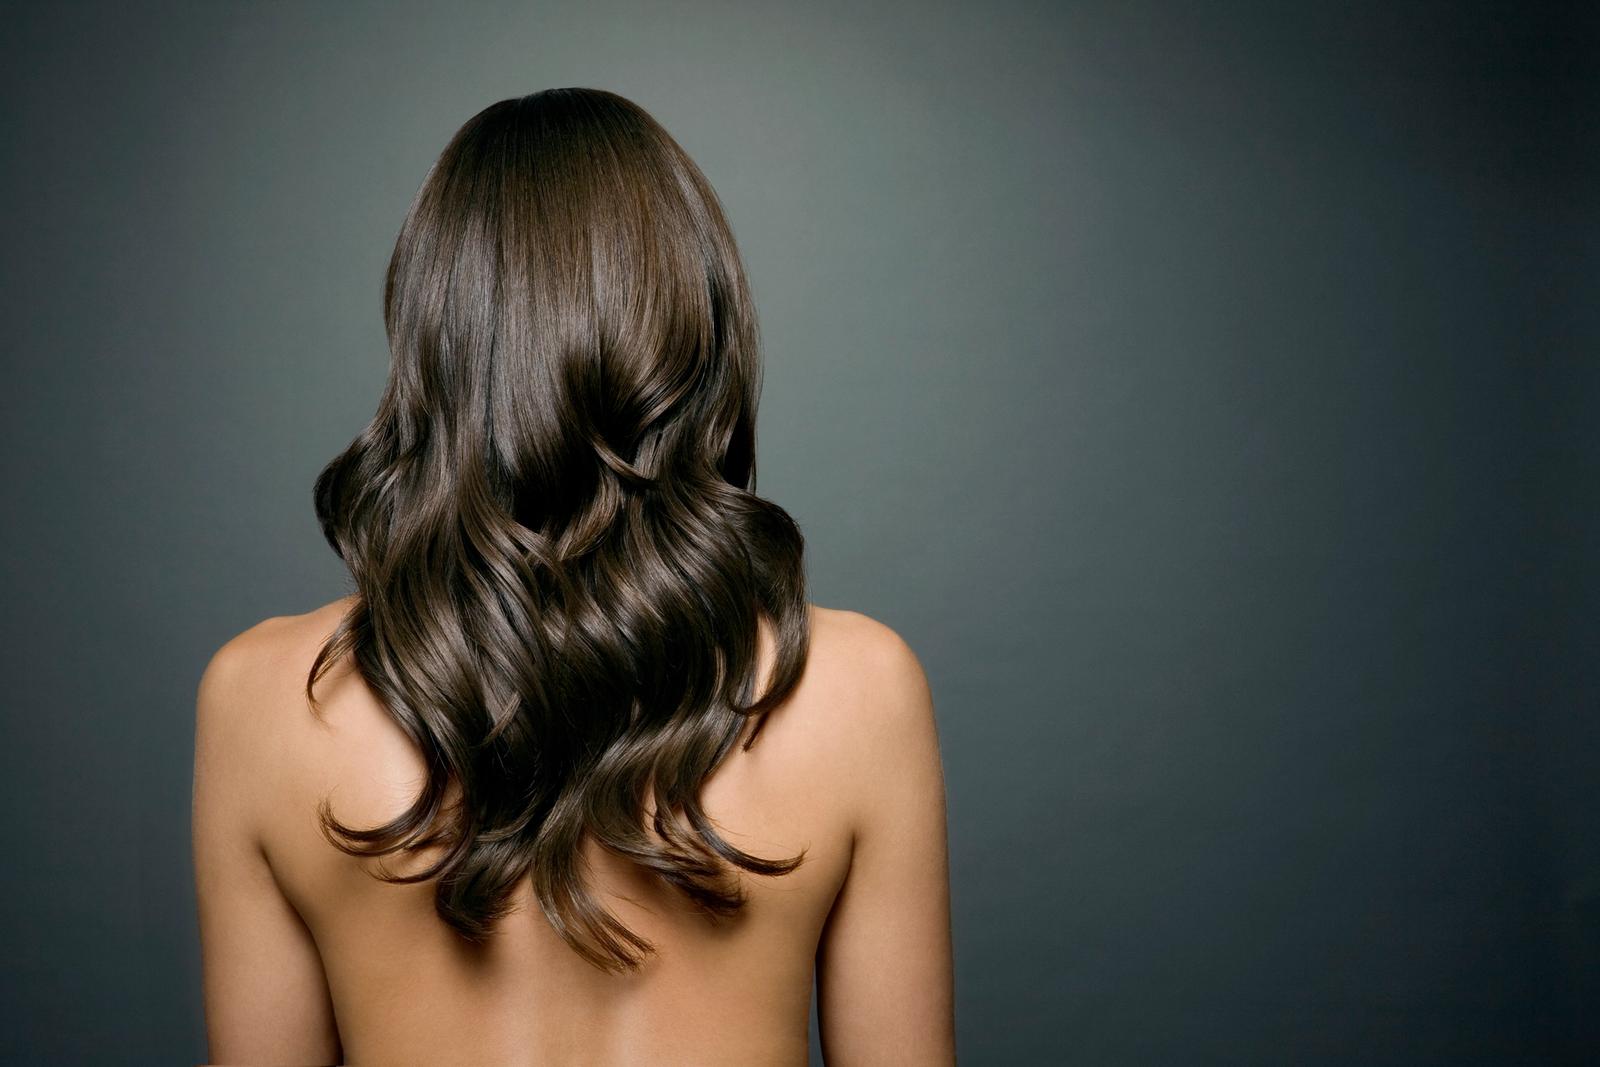 The right way to deep-condition hair - Nexxus US